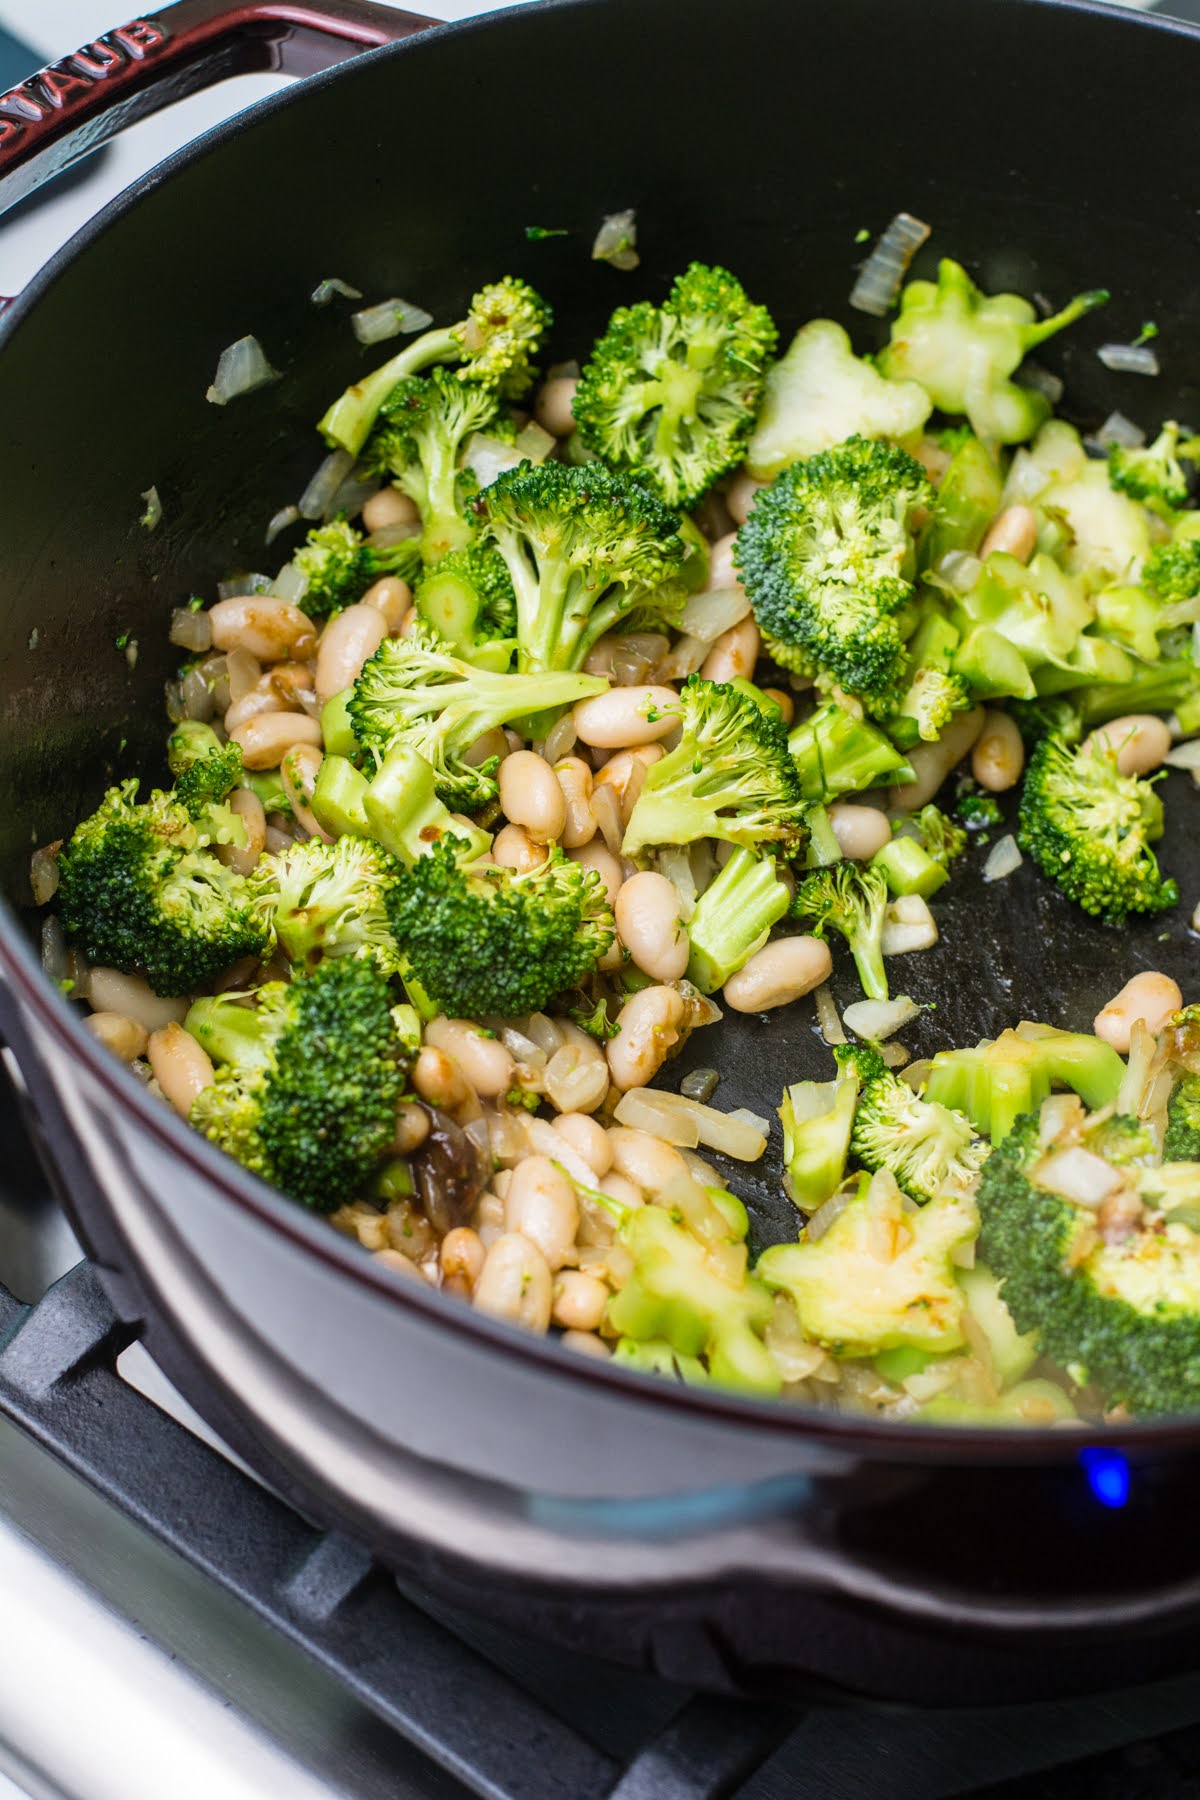 Broccoli and white beans sauteing in a pan